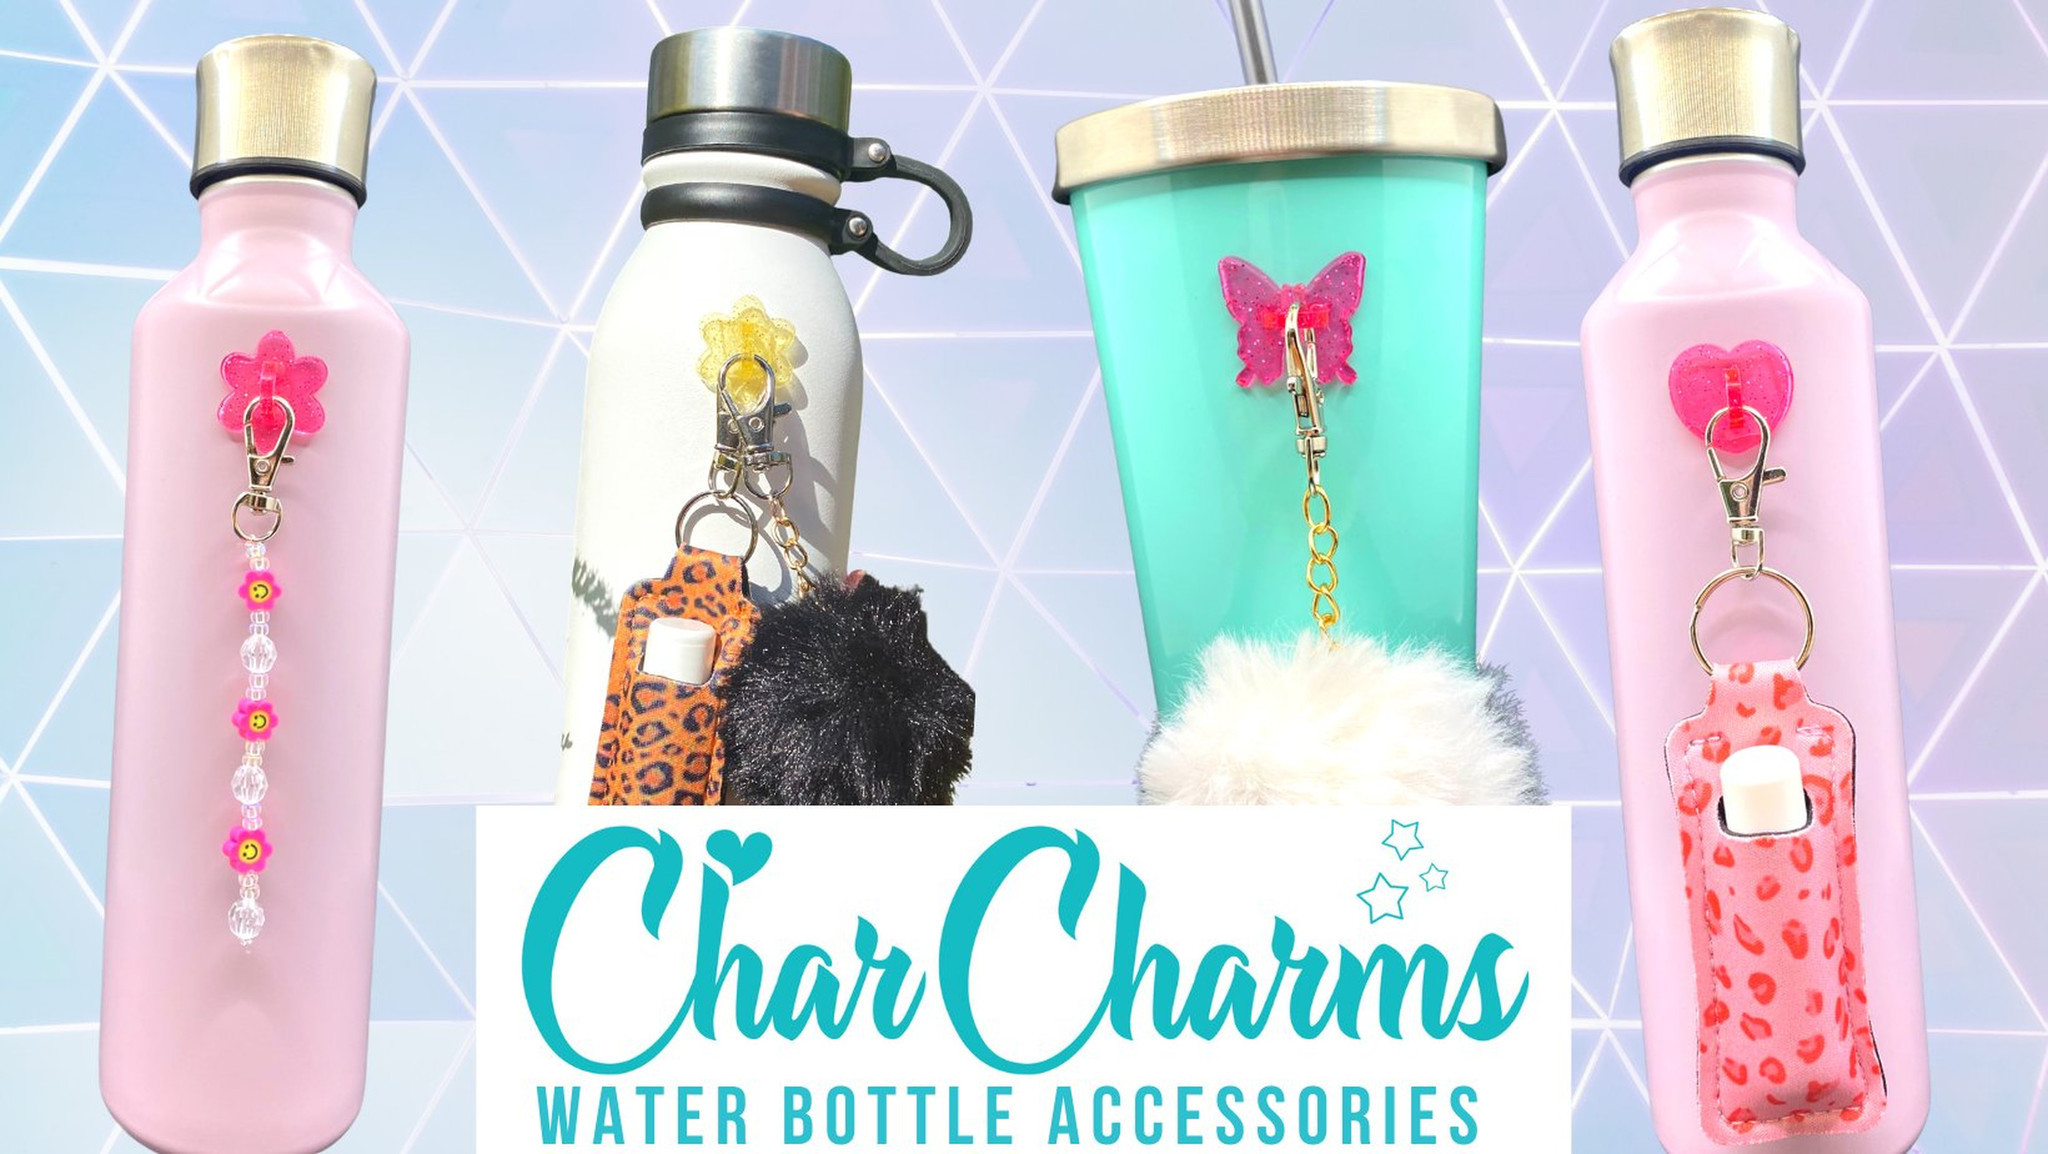 Urban Outfitters CharCharms UO Exclusive Water Bottle Charm